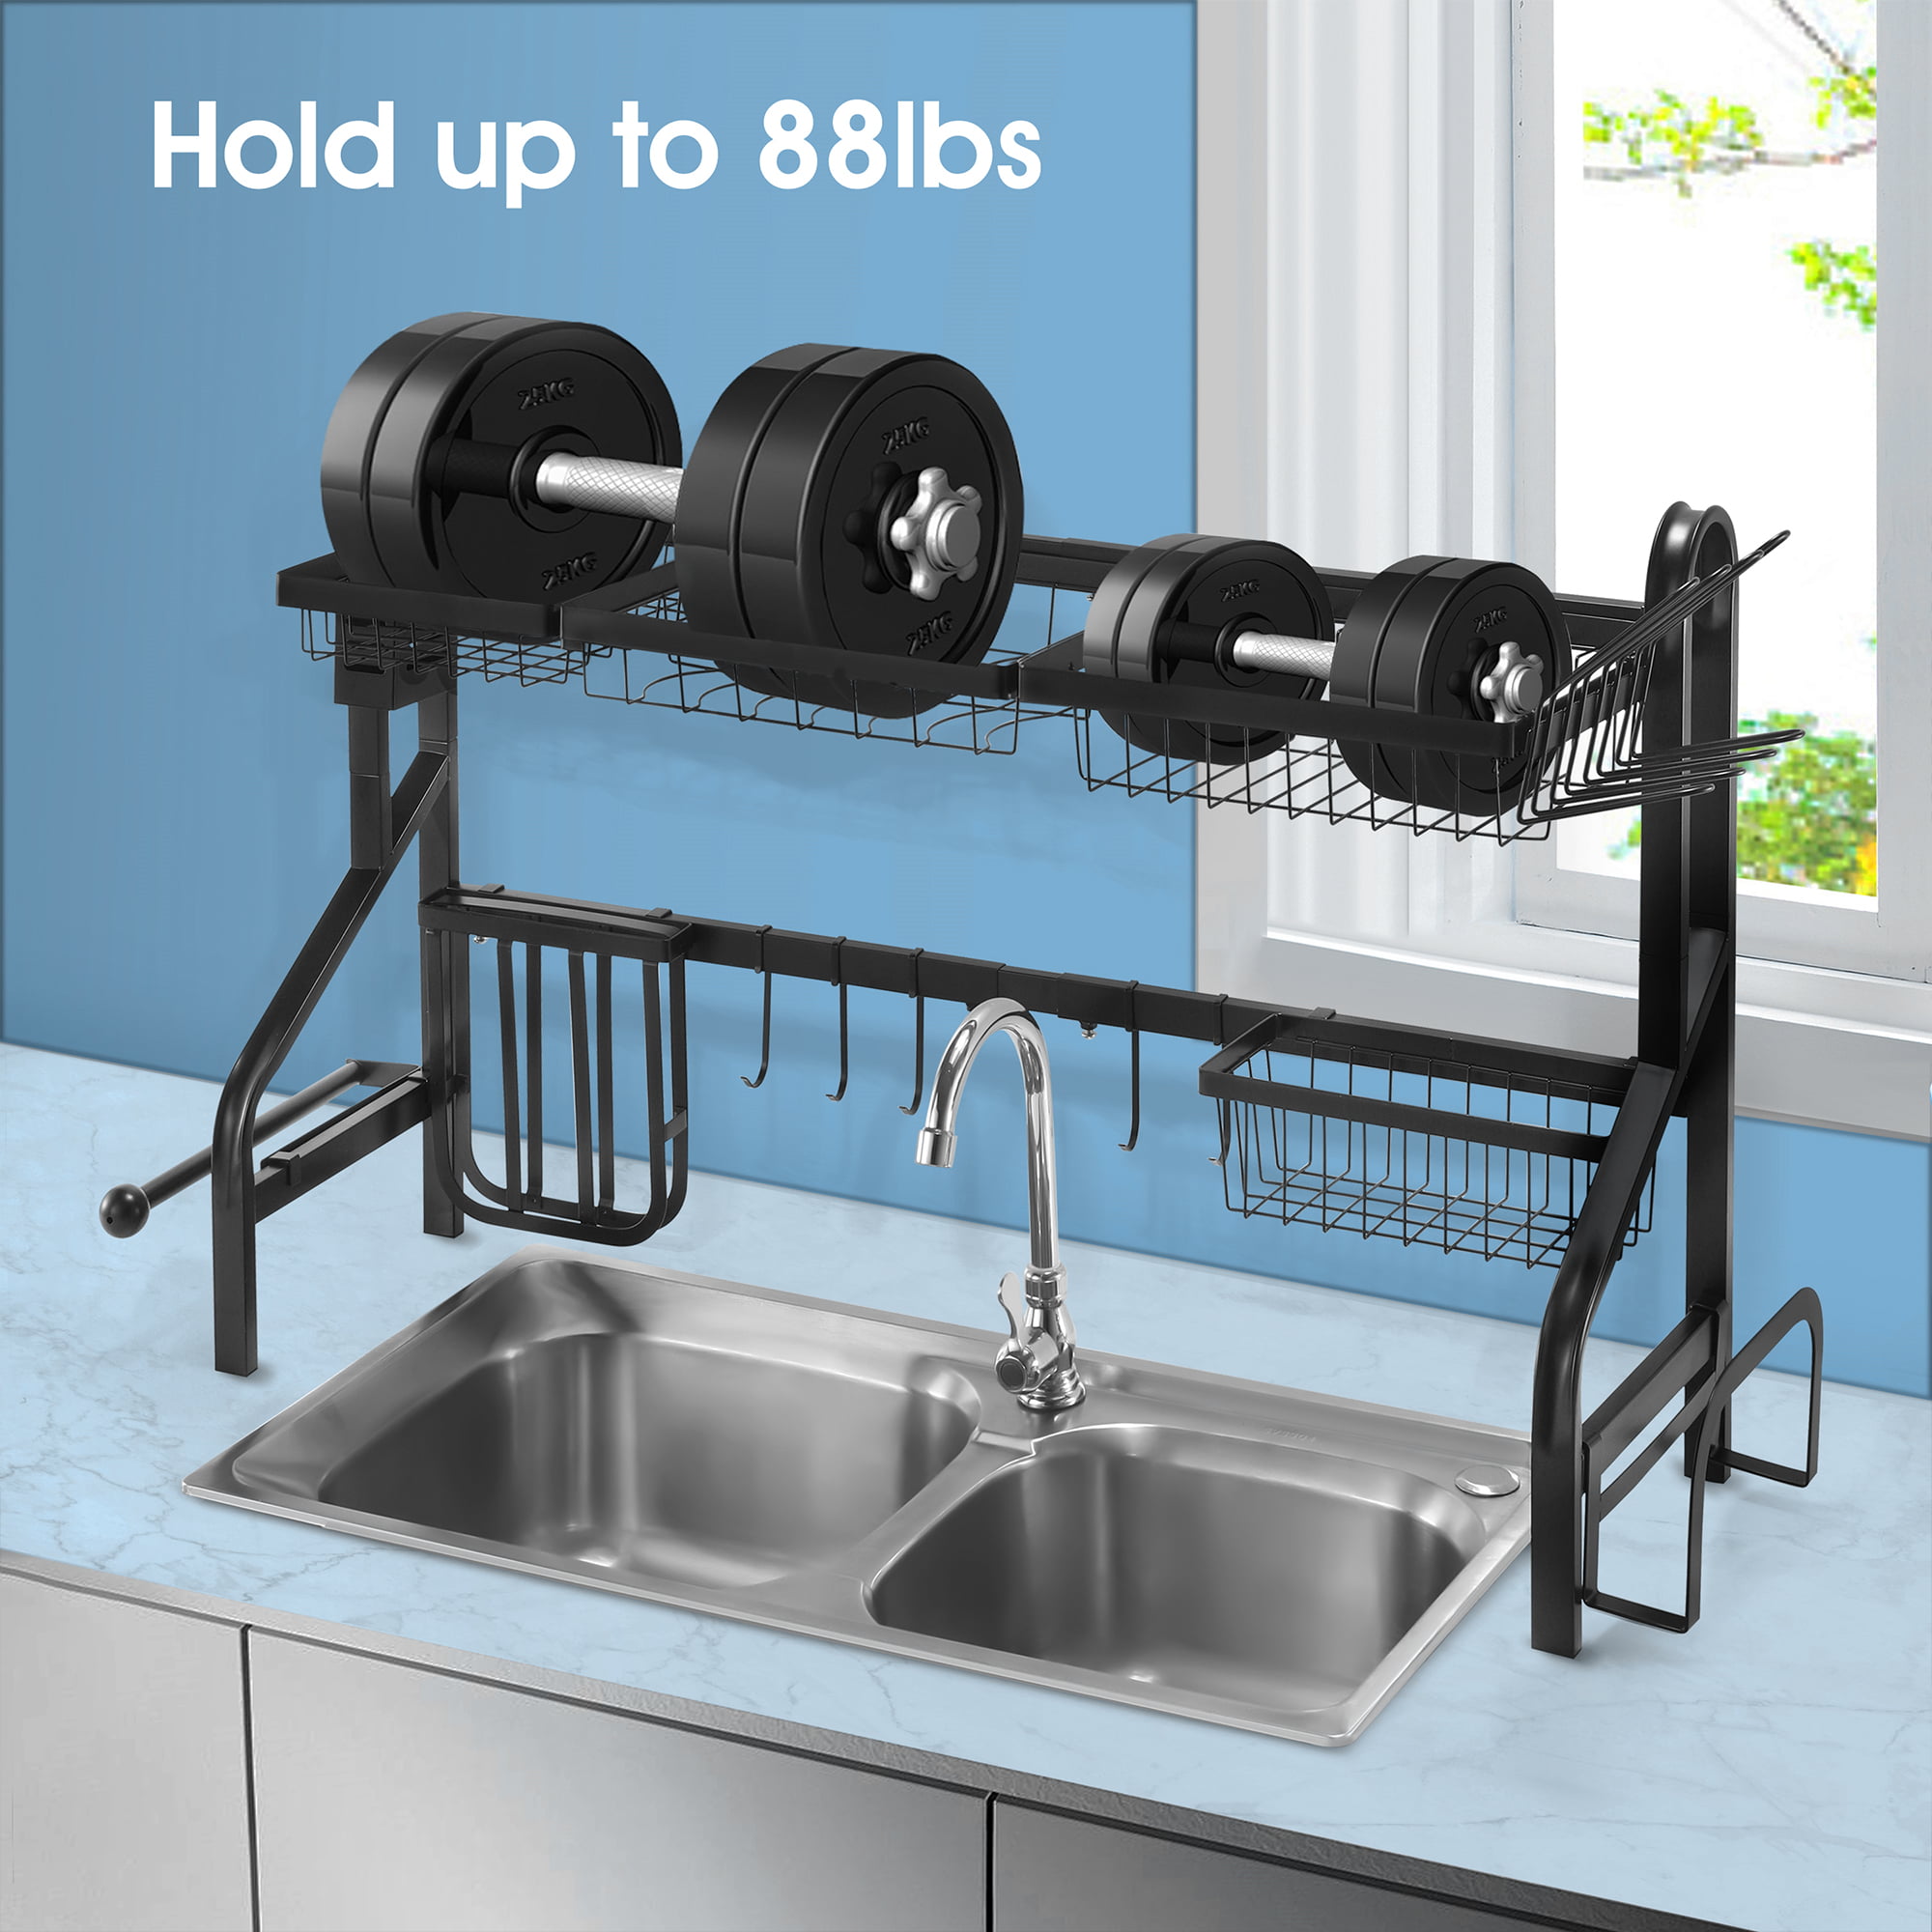 Yoleduo Over The Sink Dish Drying Rack - Space-Saving Kitchen Sink